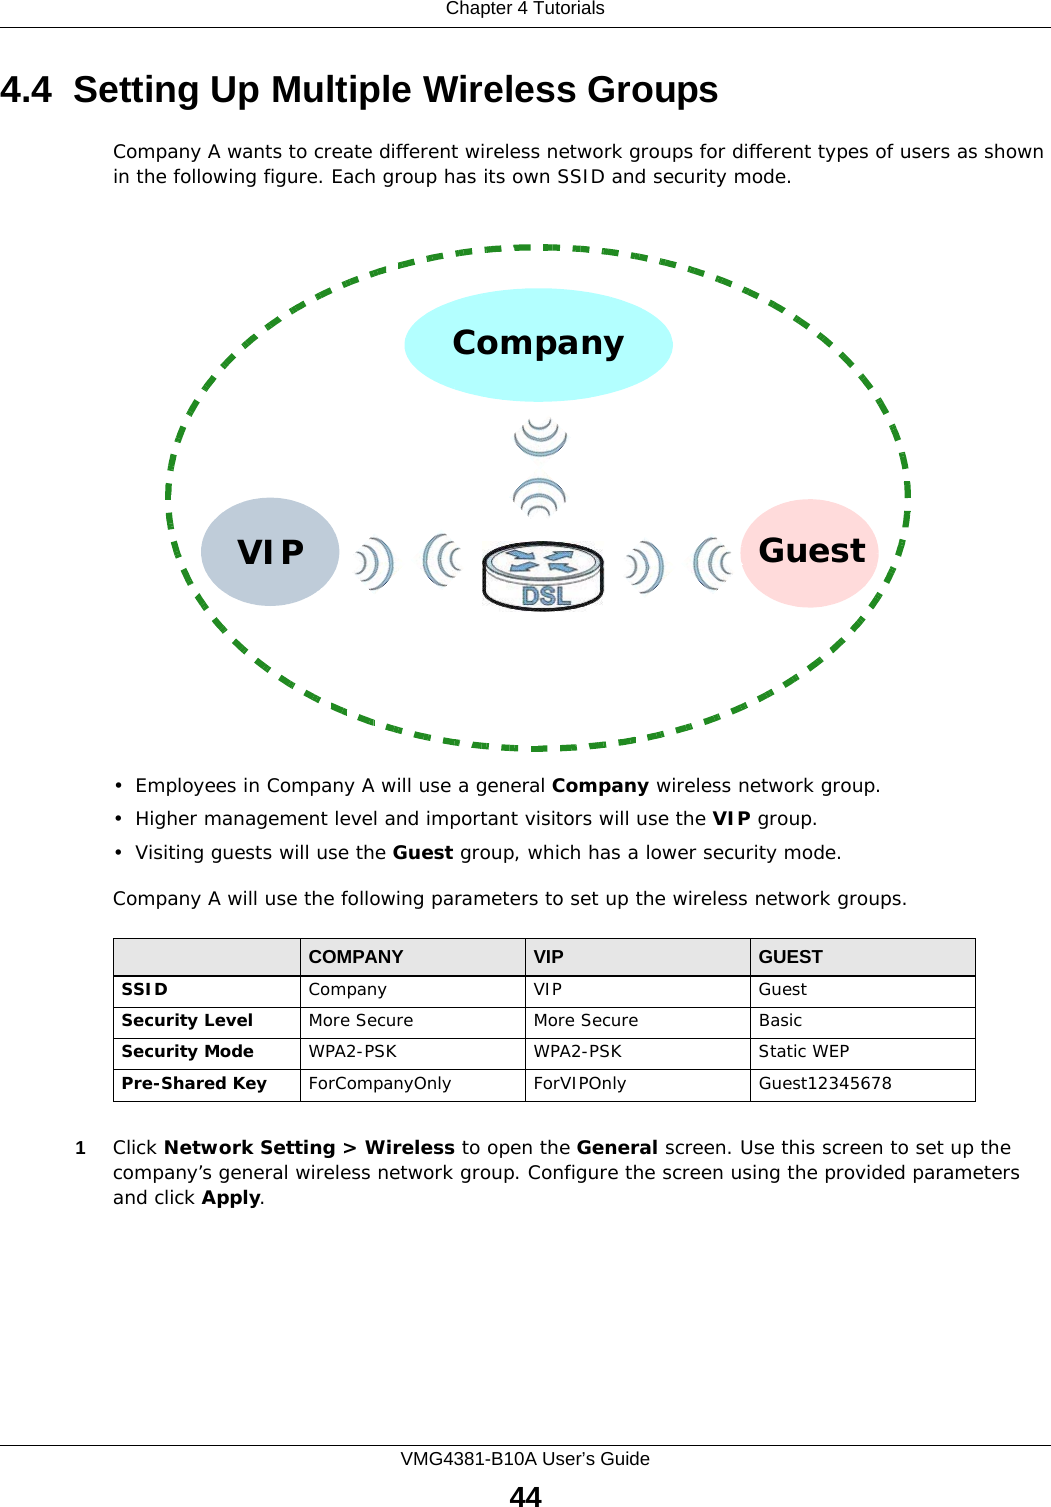 Chapter 4 TutorialsVMG4381-B10A User’s Guide444.4  Setting Up Multiple Wireless GroupsCompany A wants to create different wireless network groups for different types of users as shown in the following figure. Each group has its own SSID and security mode.• Employees in Company A will use a general Company wireless network group.• Higher management level and important visitors will use the VIP group.• Visiting guests will use the Guest group, which has a lower security mode.Company A will use the following parameters to set up the wireless network groups.1Click Network Setting &gt; Wireless to open the General screen. Use this screen to set up the company’s general wireless network group. Configure the screen using the provided parameters and click Apply.COMPANY VIP GUESTSSID Company VIP GuestSecurity Level More Secure More Secure BasicSecurity Mode WPA2-PSK WPA2-PSK Static WEPPre-Shared Key ForCompanyOnly ForVIPOnly Guest12345678CompanyVIP Guest